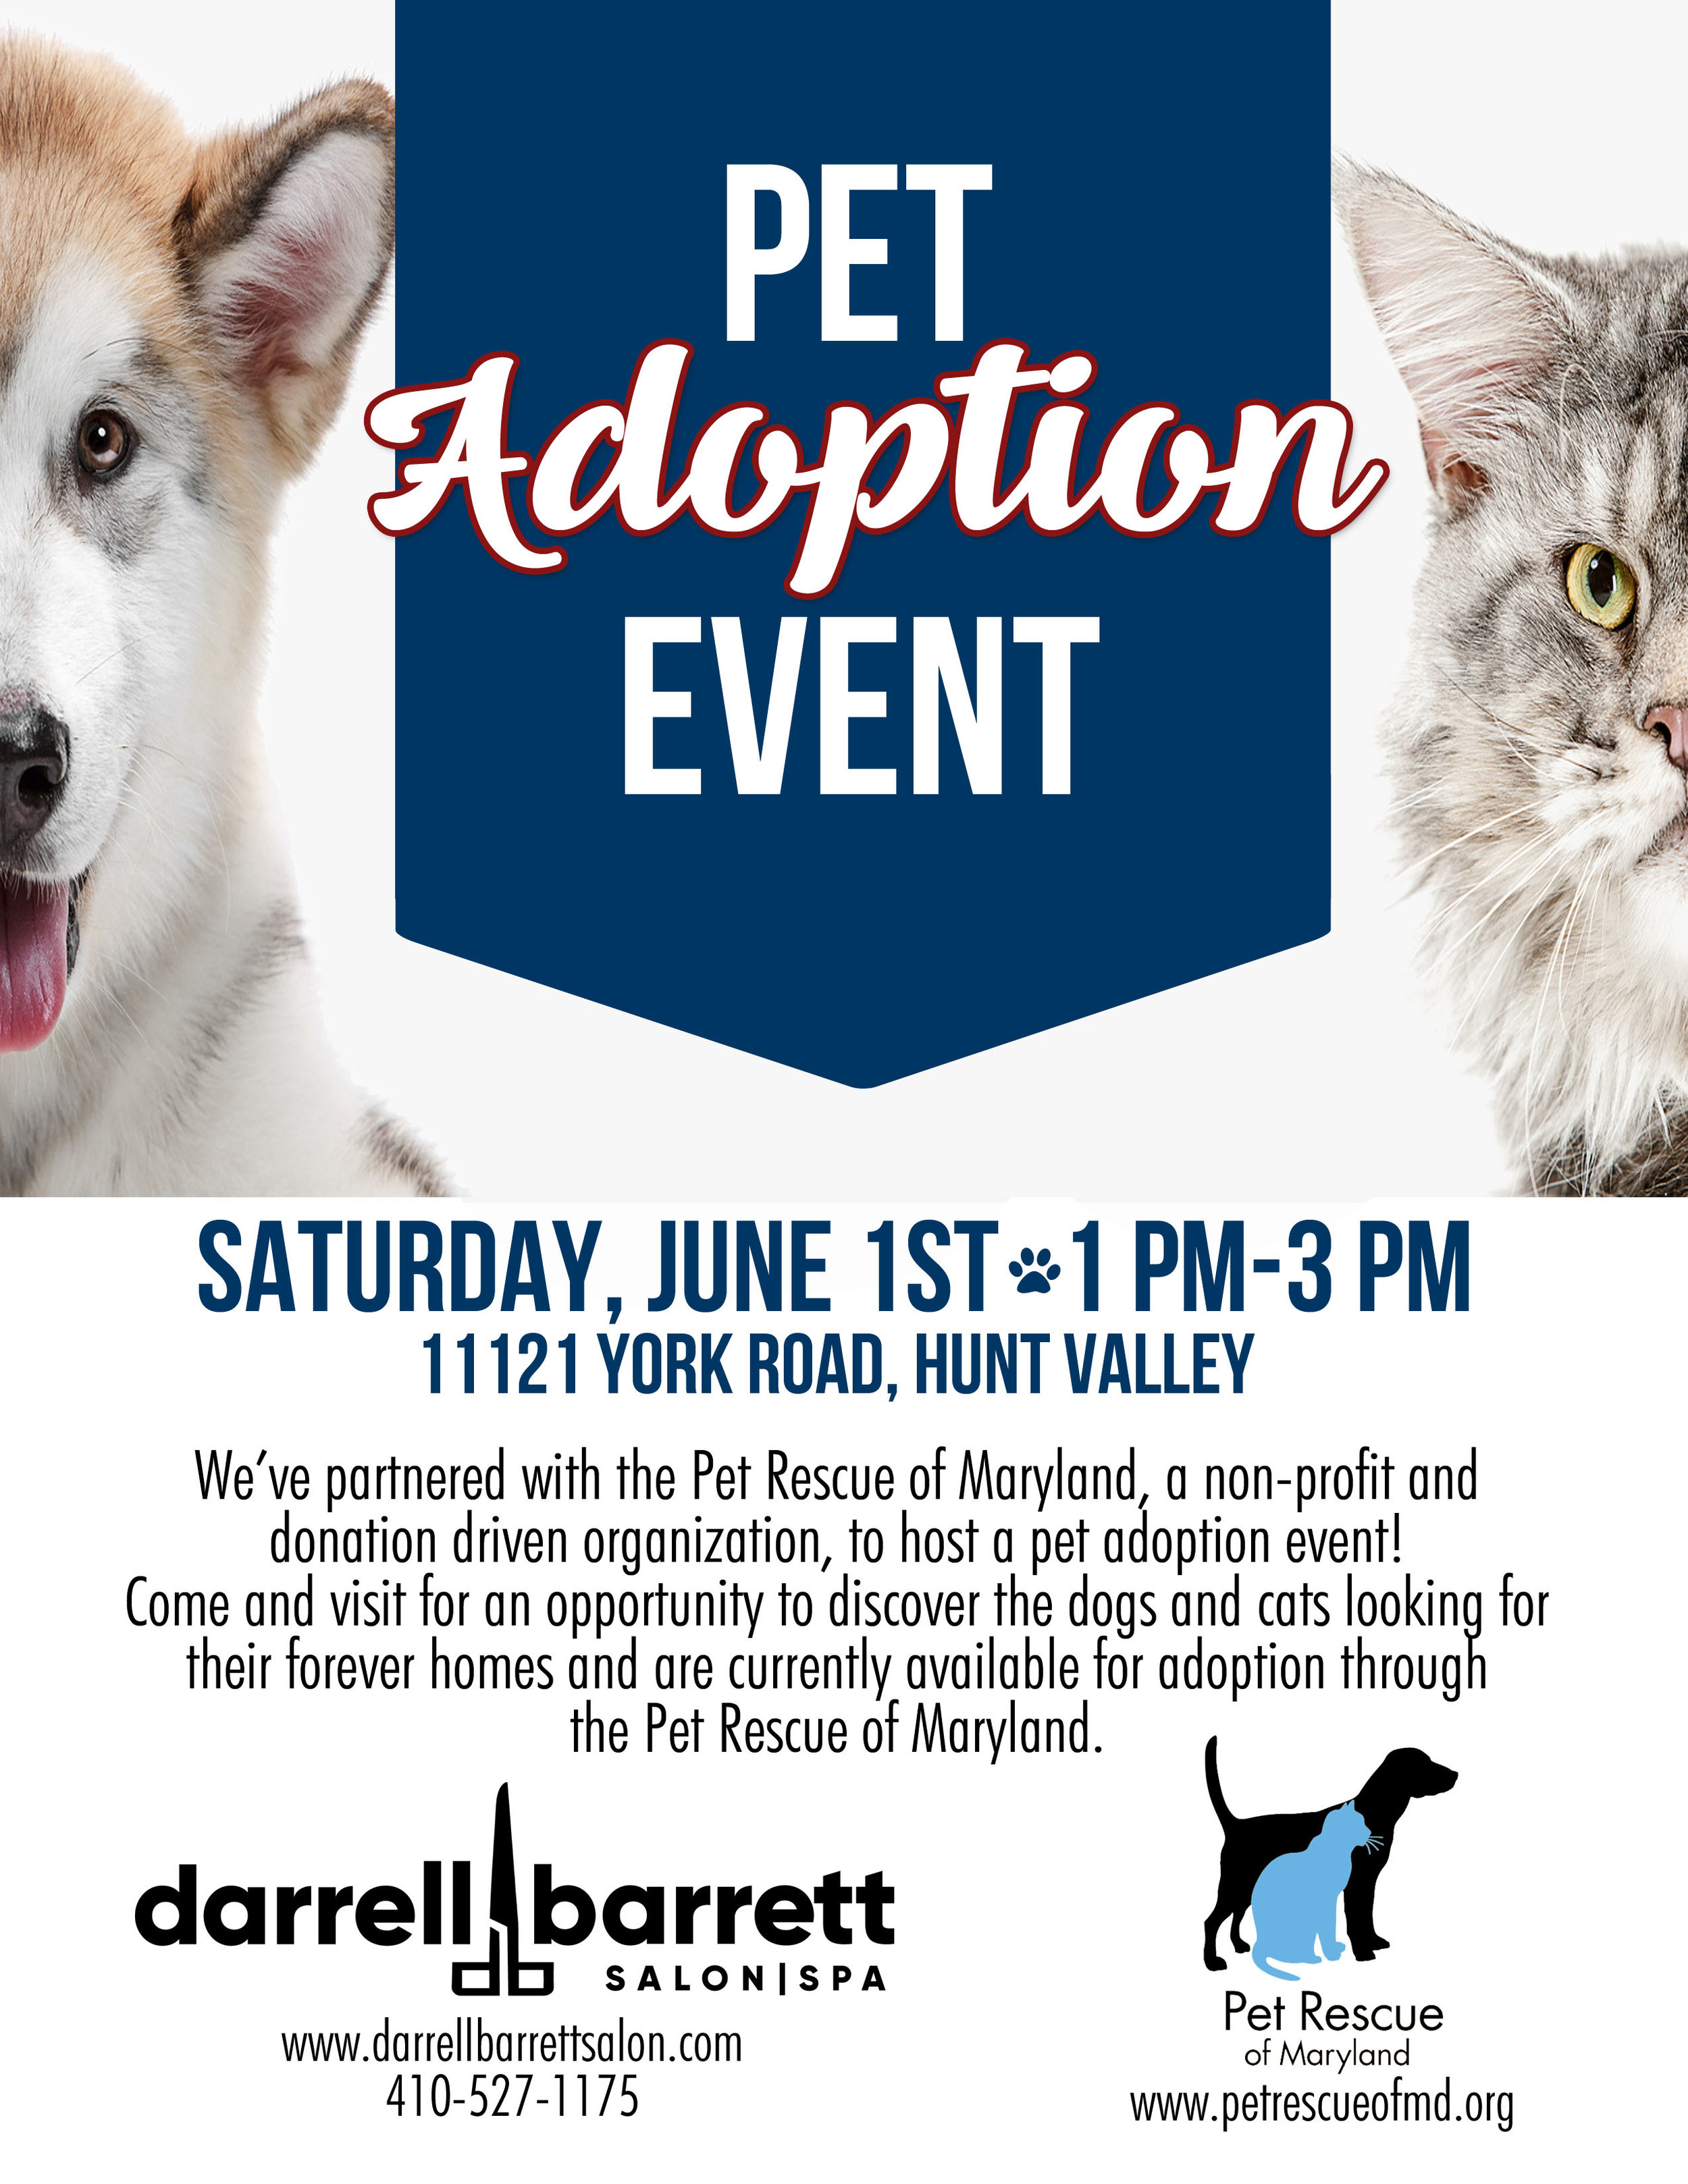 dog rescue events today near me